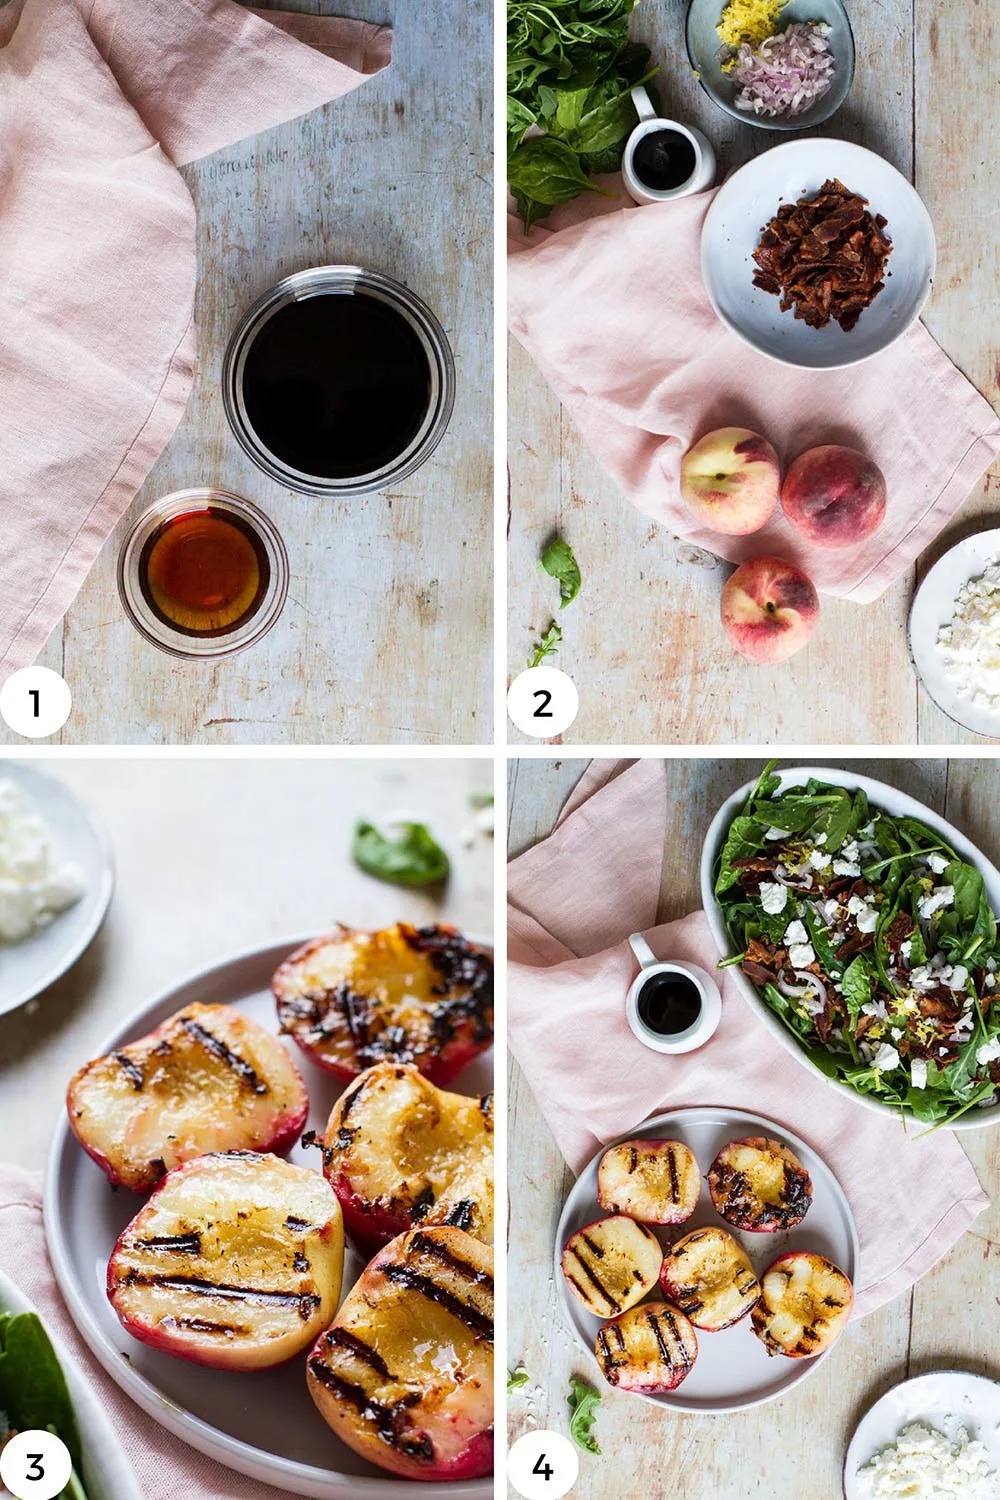 Steps to make grilled peach salad.